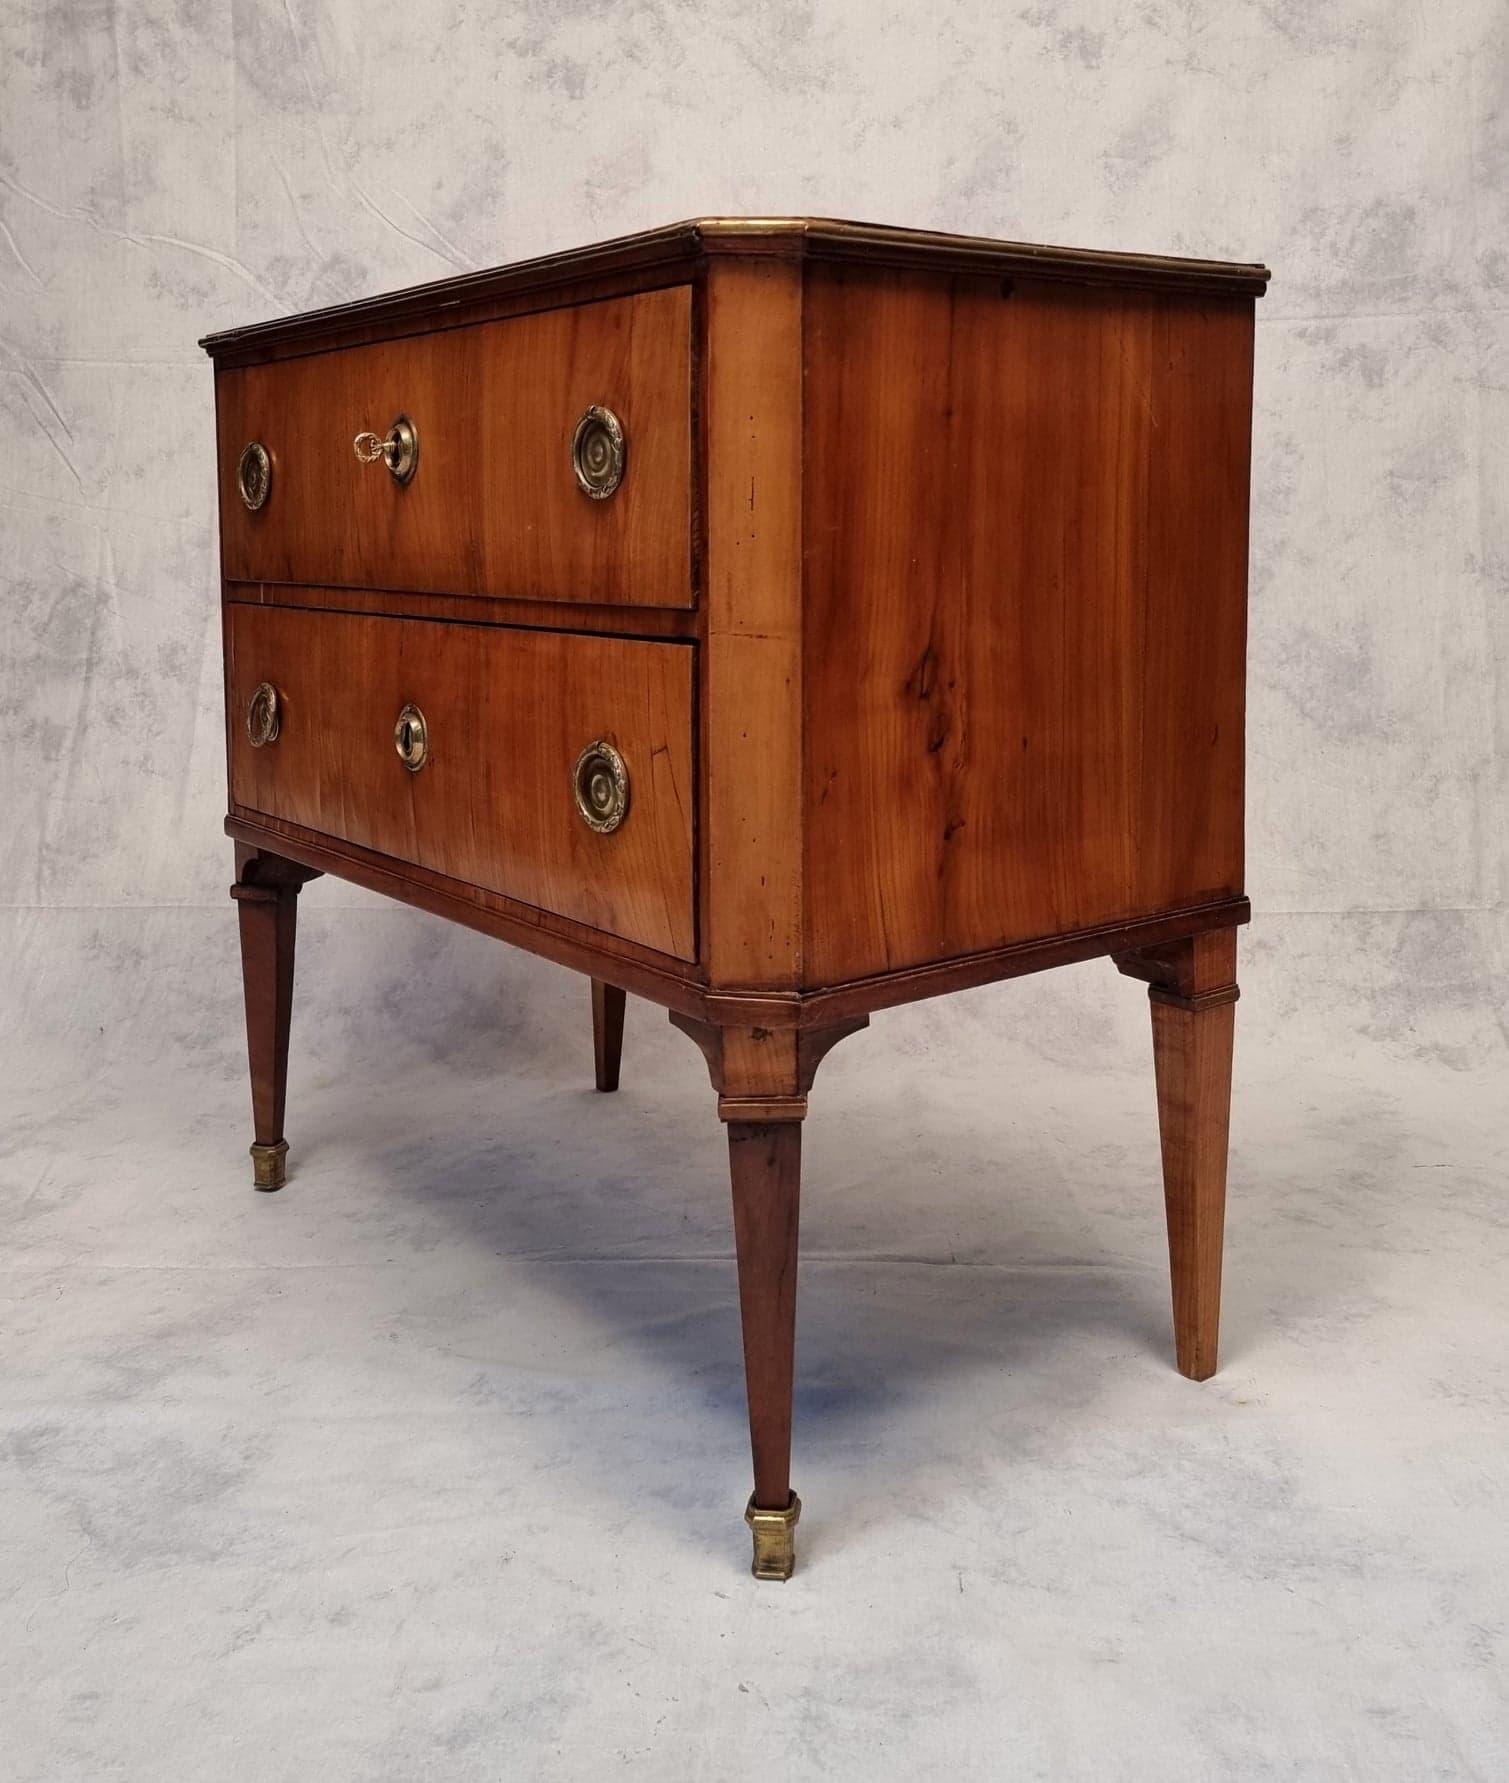 Superb small chest of drawers called sauteuse in natural wood from the Louis XVI period. This high chest of drawers on legs is worked in cherrywood. Knots and grain of the wood, coupled with the lightly varnished natural patina are truly